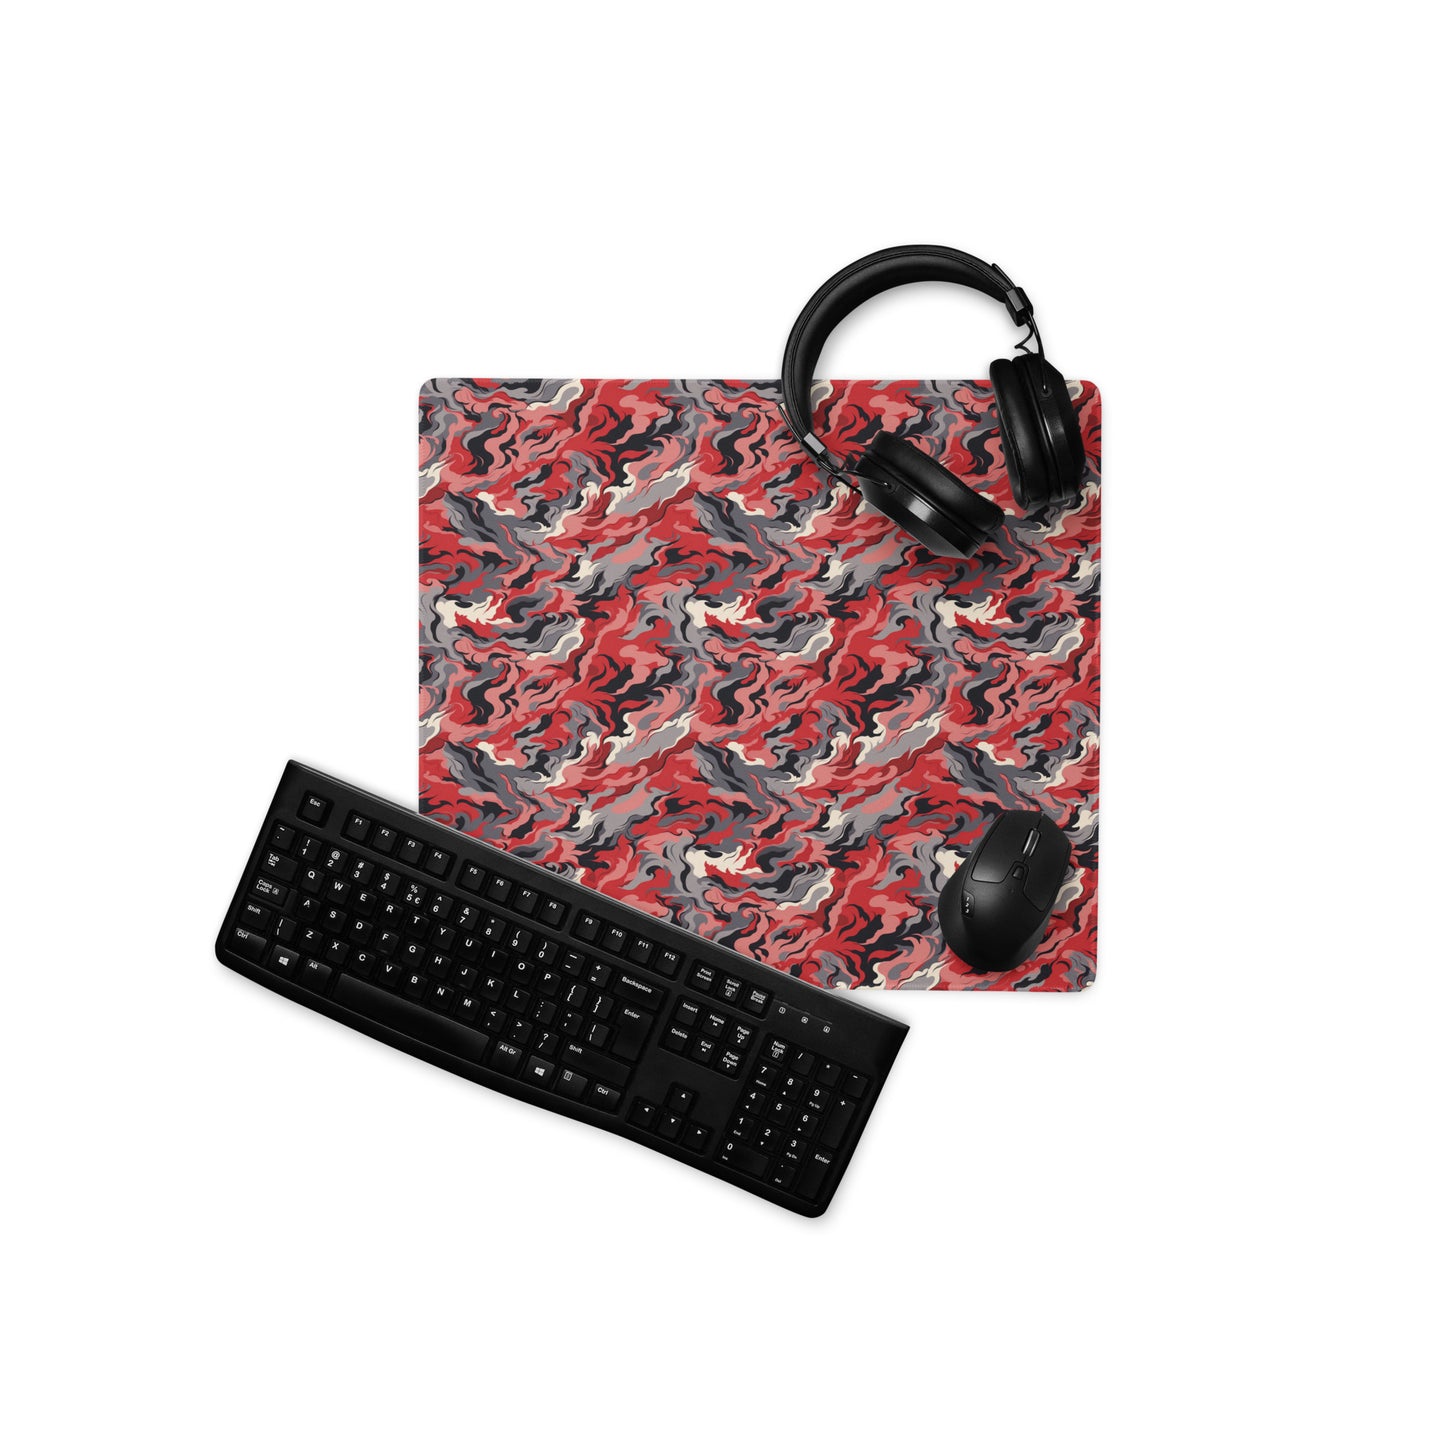 A 18" x 16" desk pad with a grey and red camo pattern. With a keyboard, mouse, and headphones sitting on it.